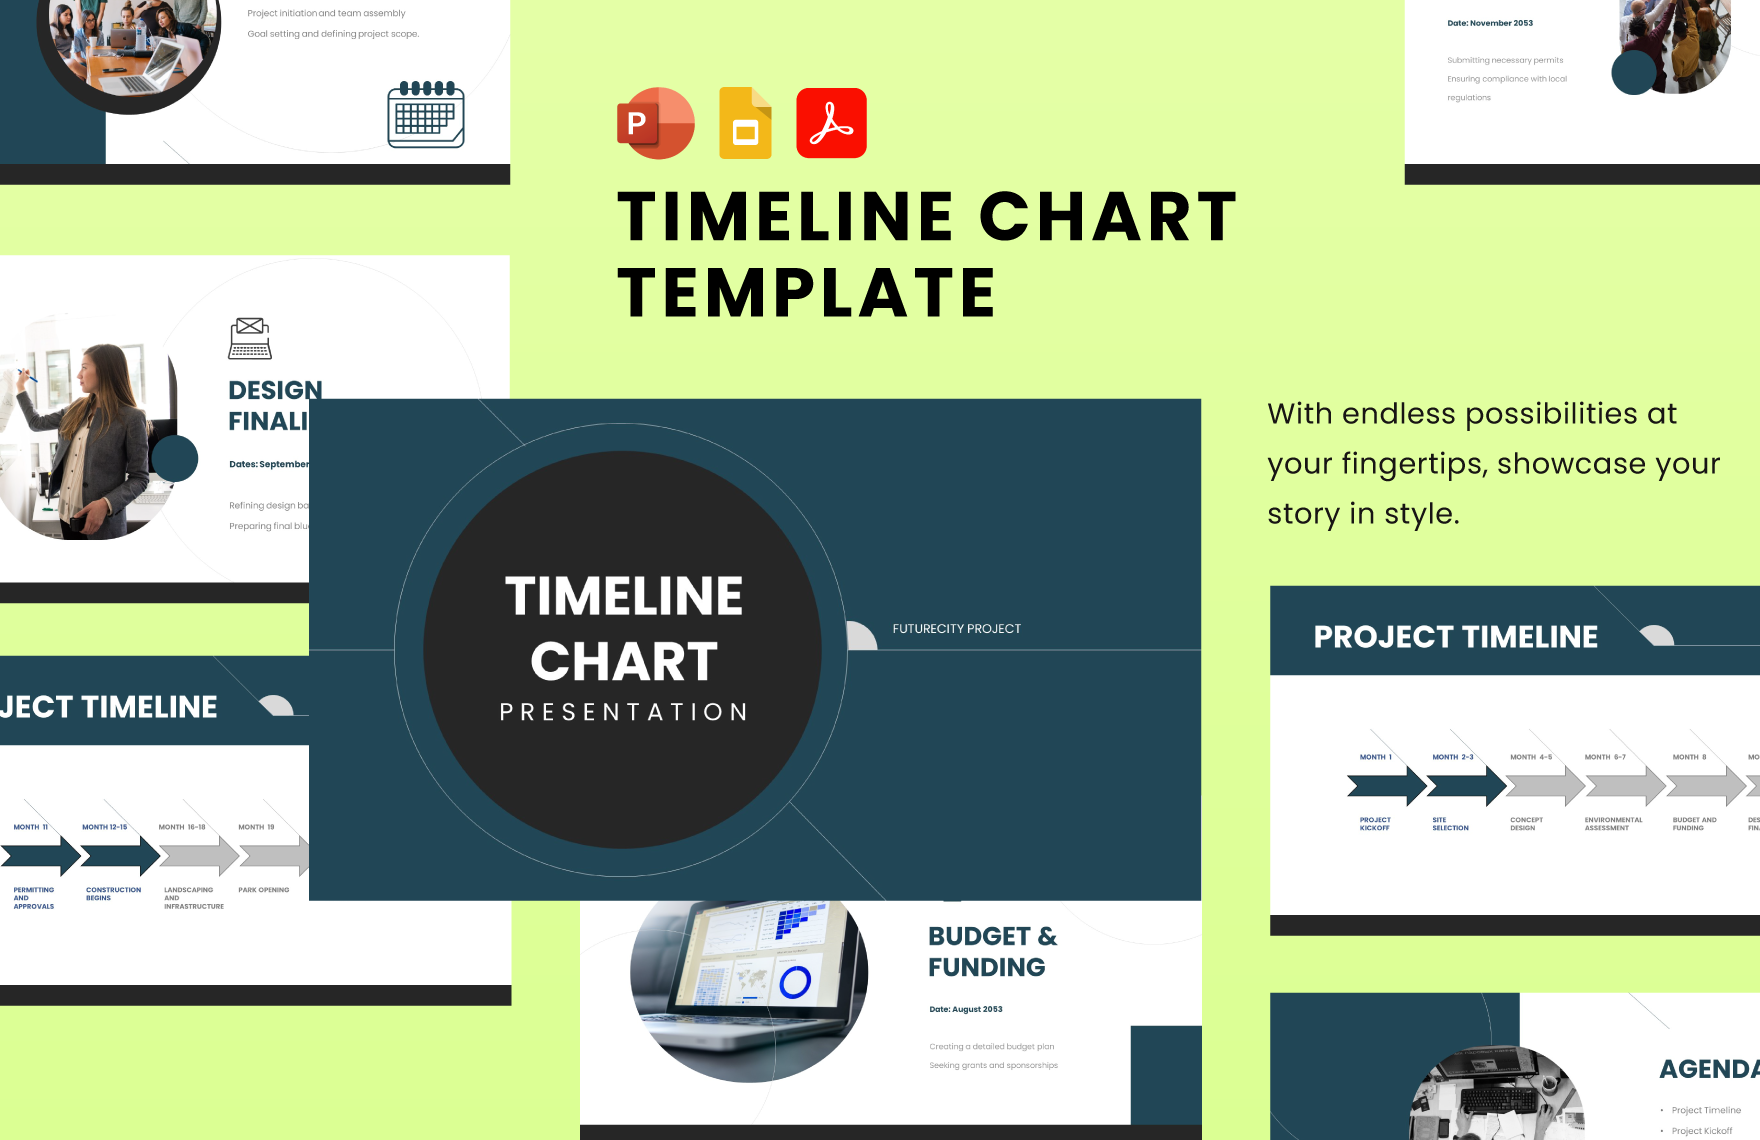 Timeline Chart Template